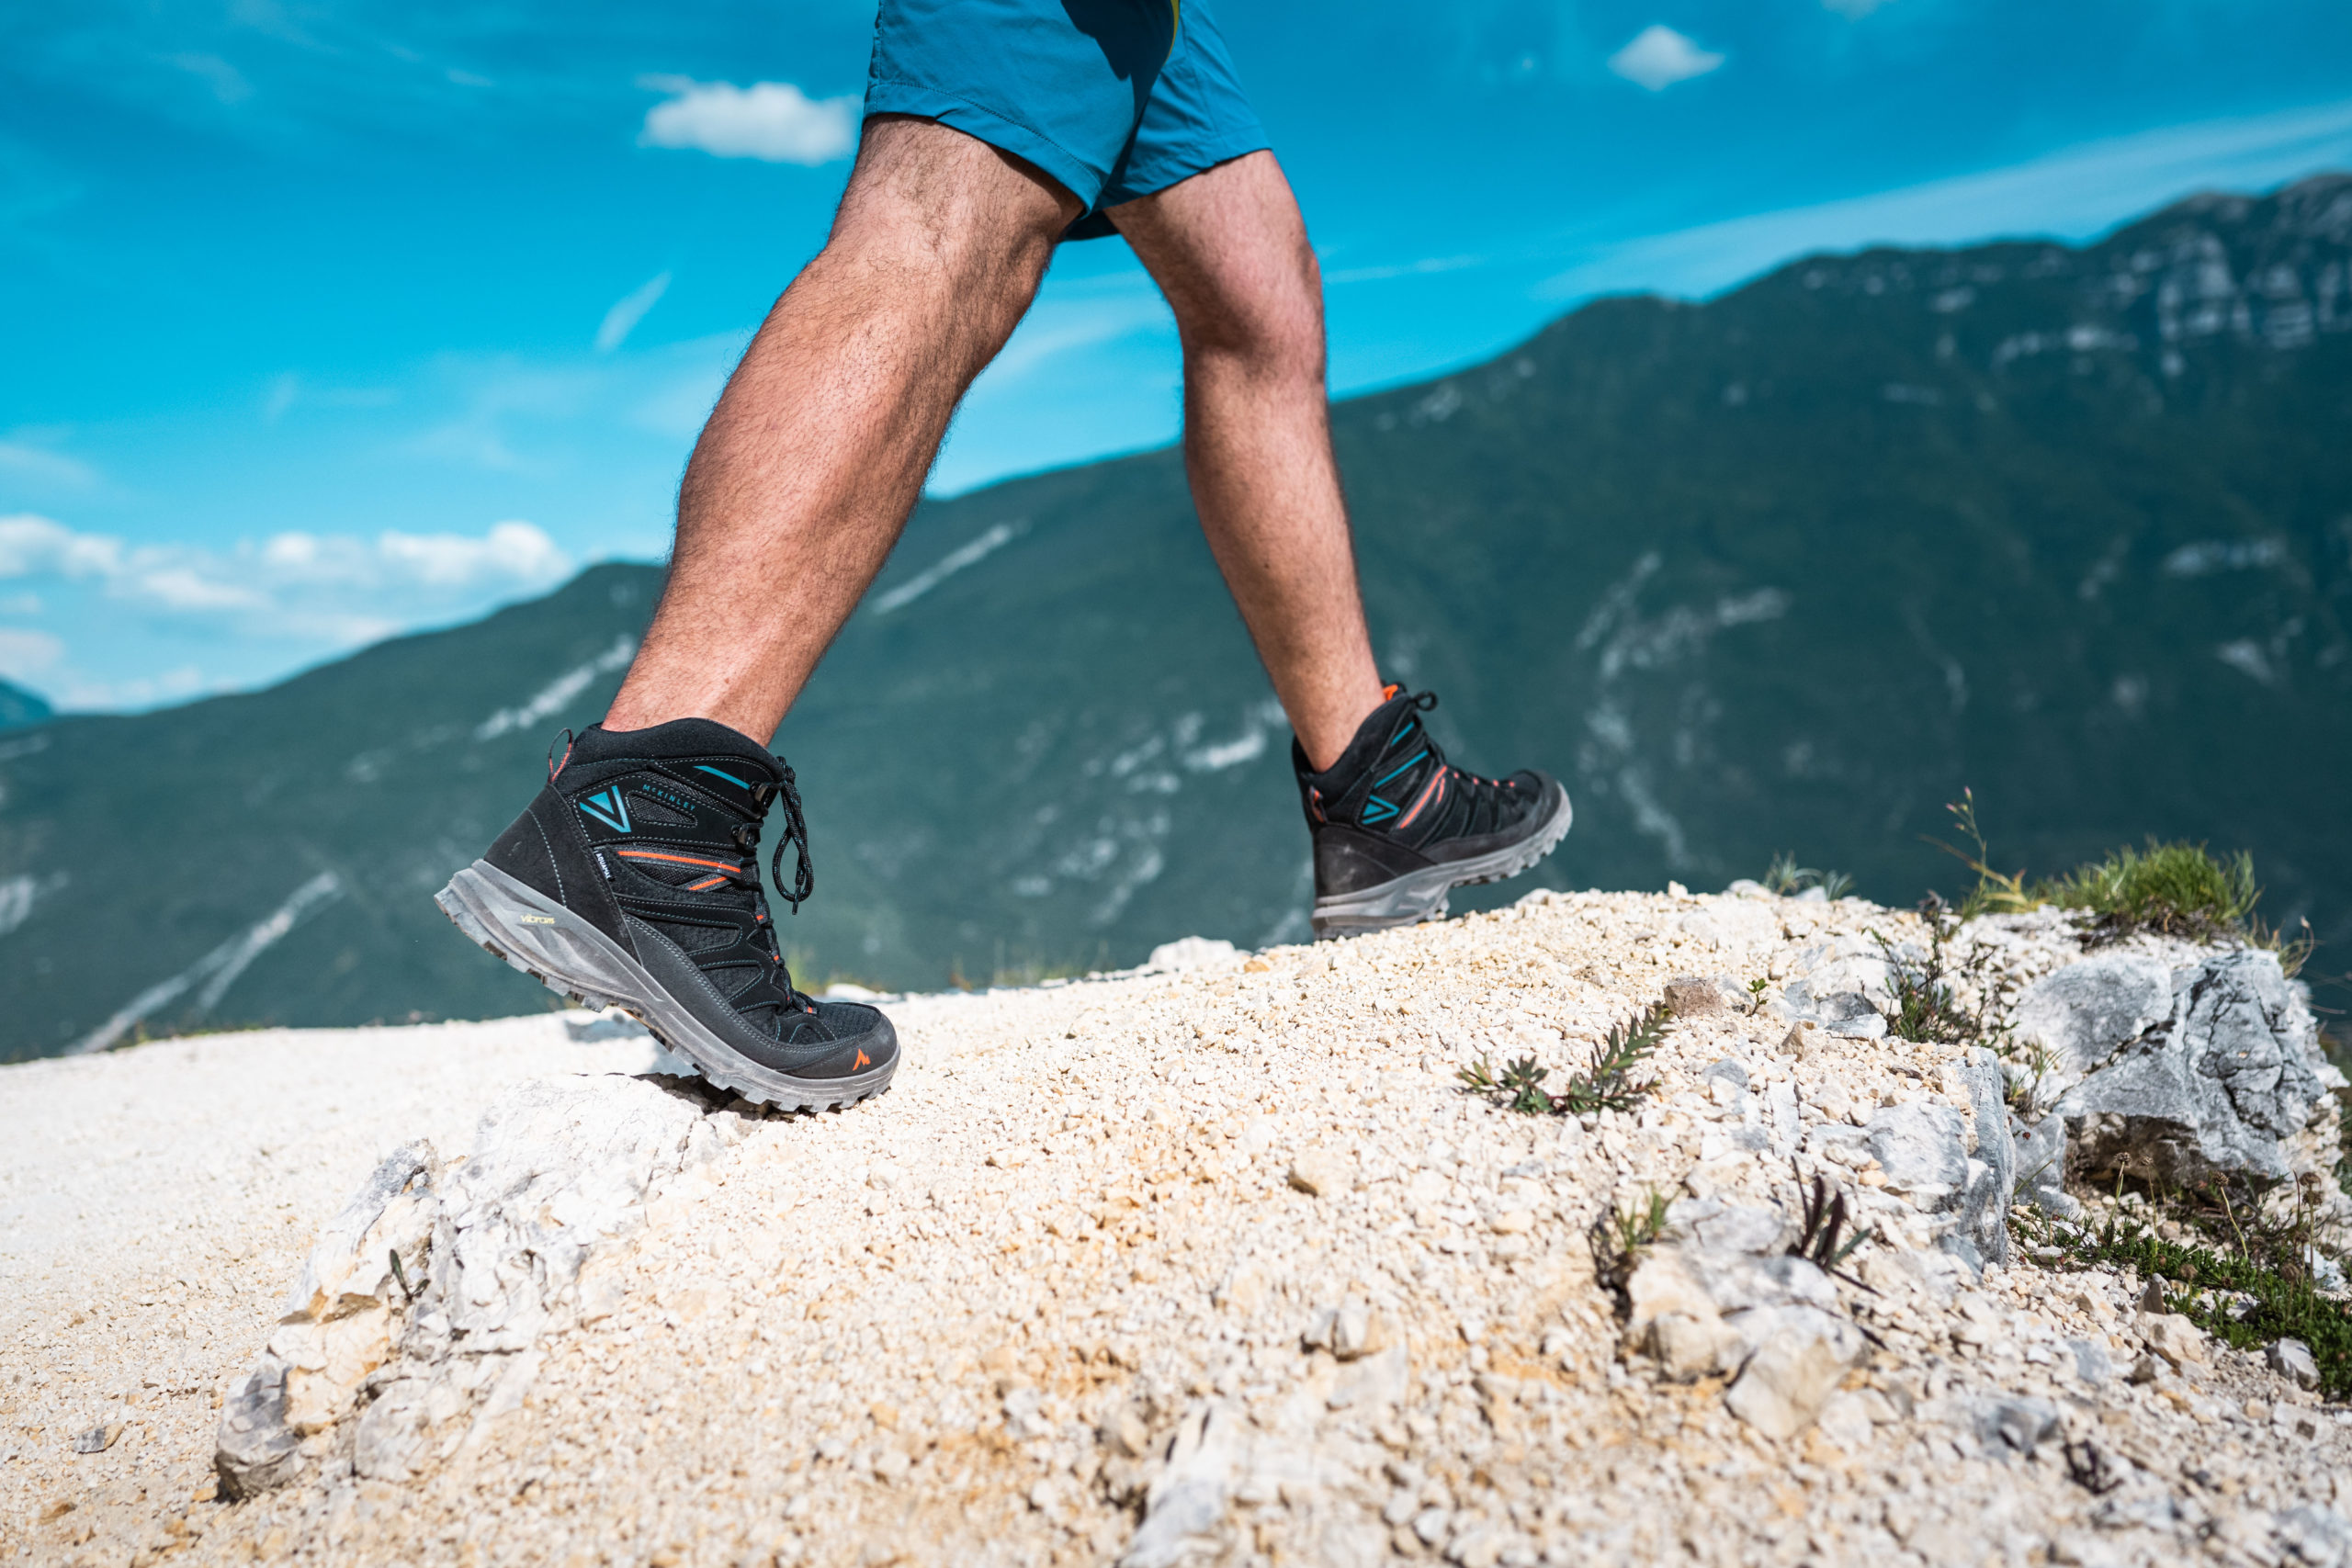 Test Time: three all-round shoes The Outdoor Journal face - mountain! Pill to every